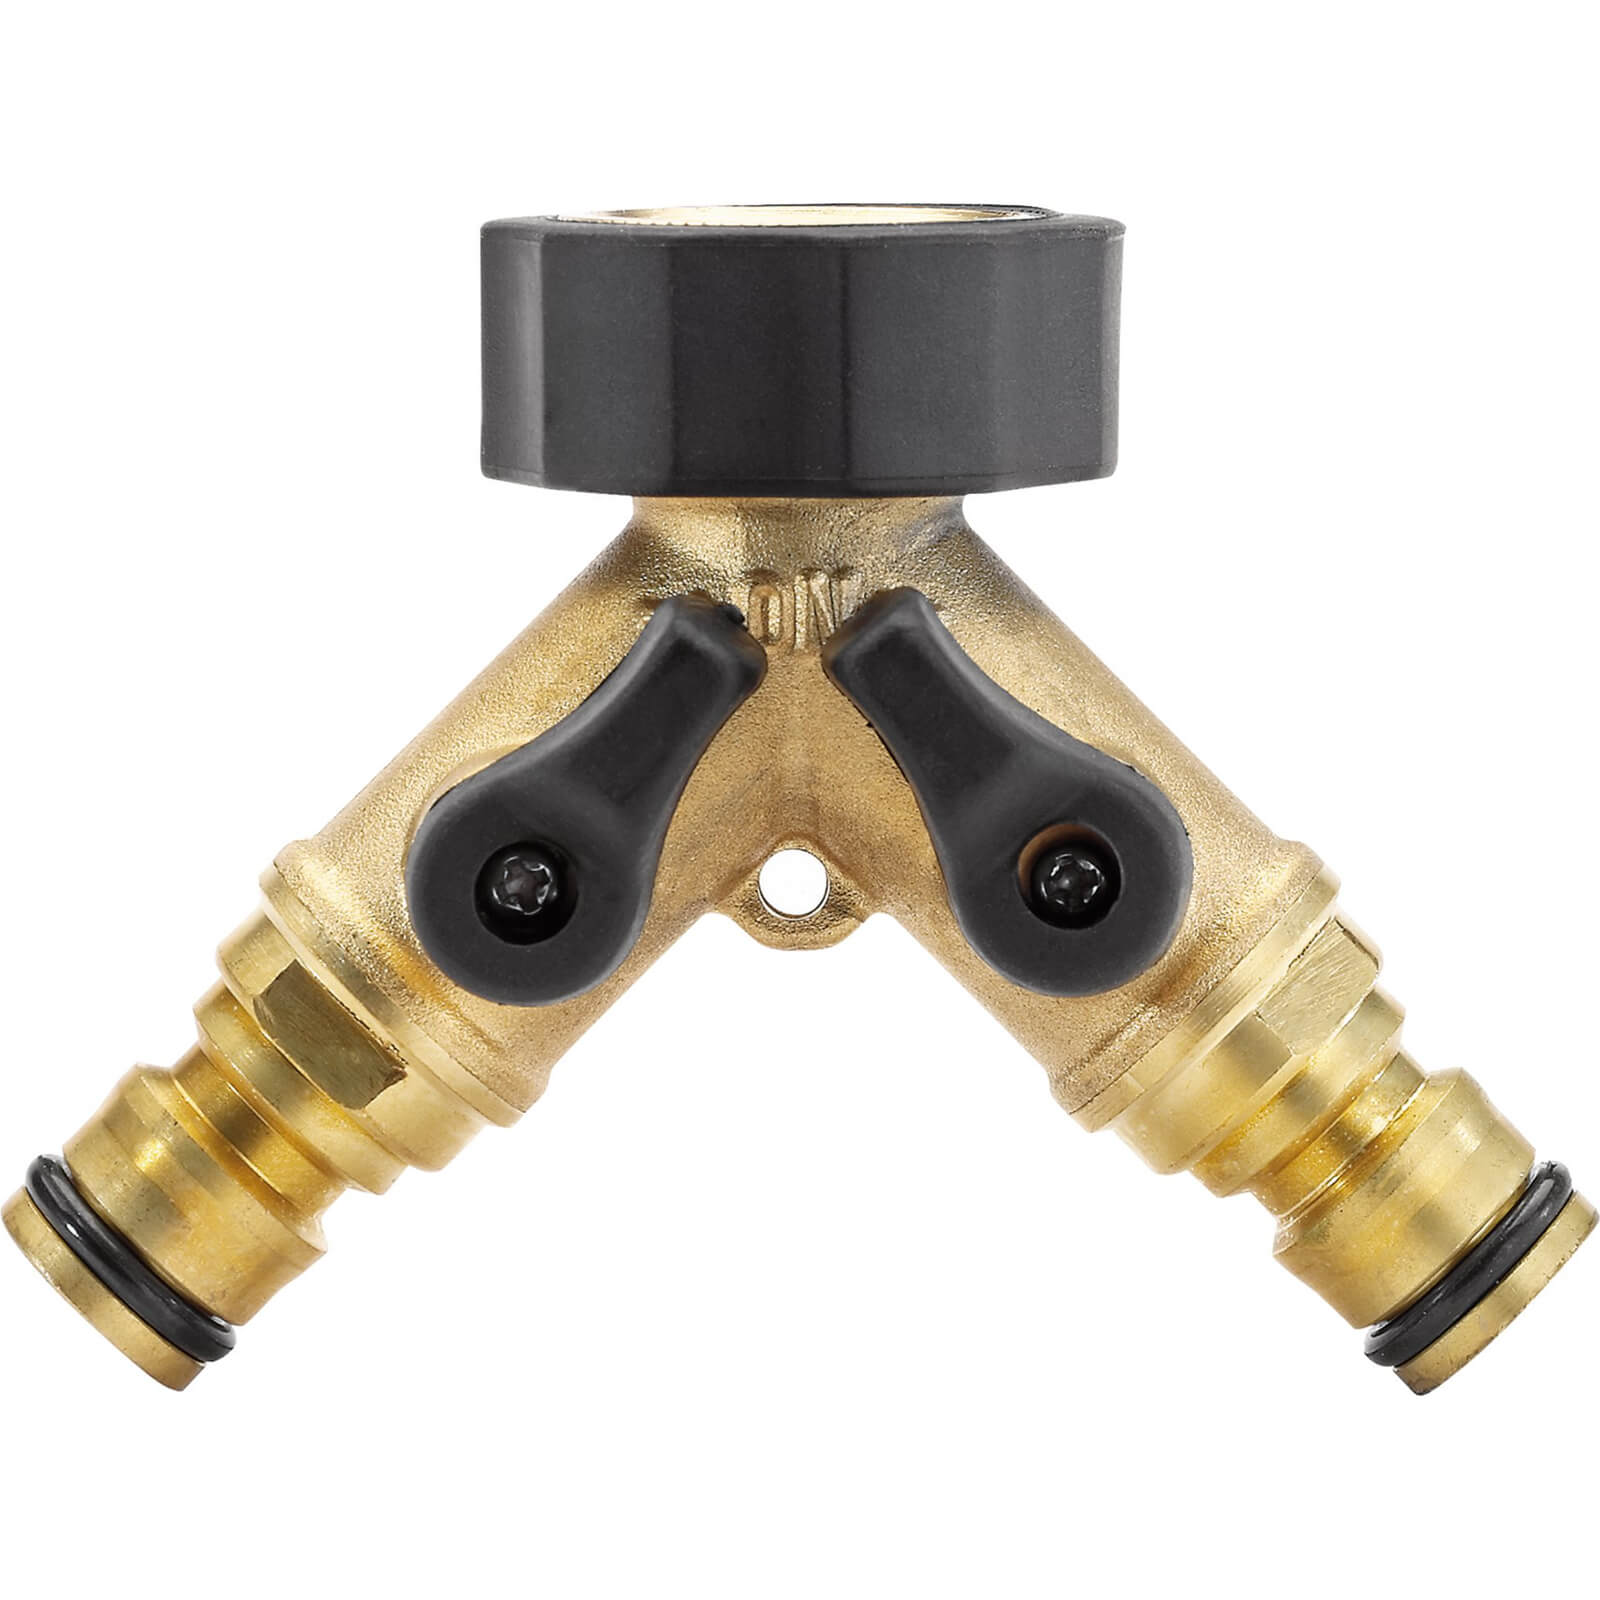 Image of Draper Expert Brass 2 Way Flow Control Tap Connector 3/4" / 19mm Pack of 1